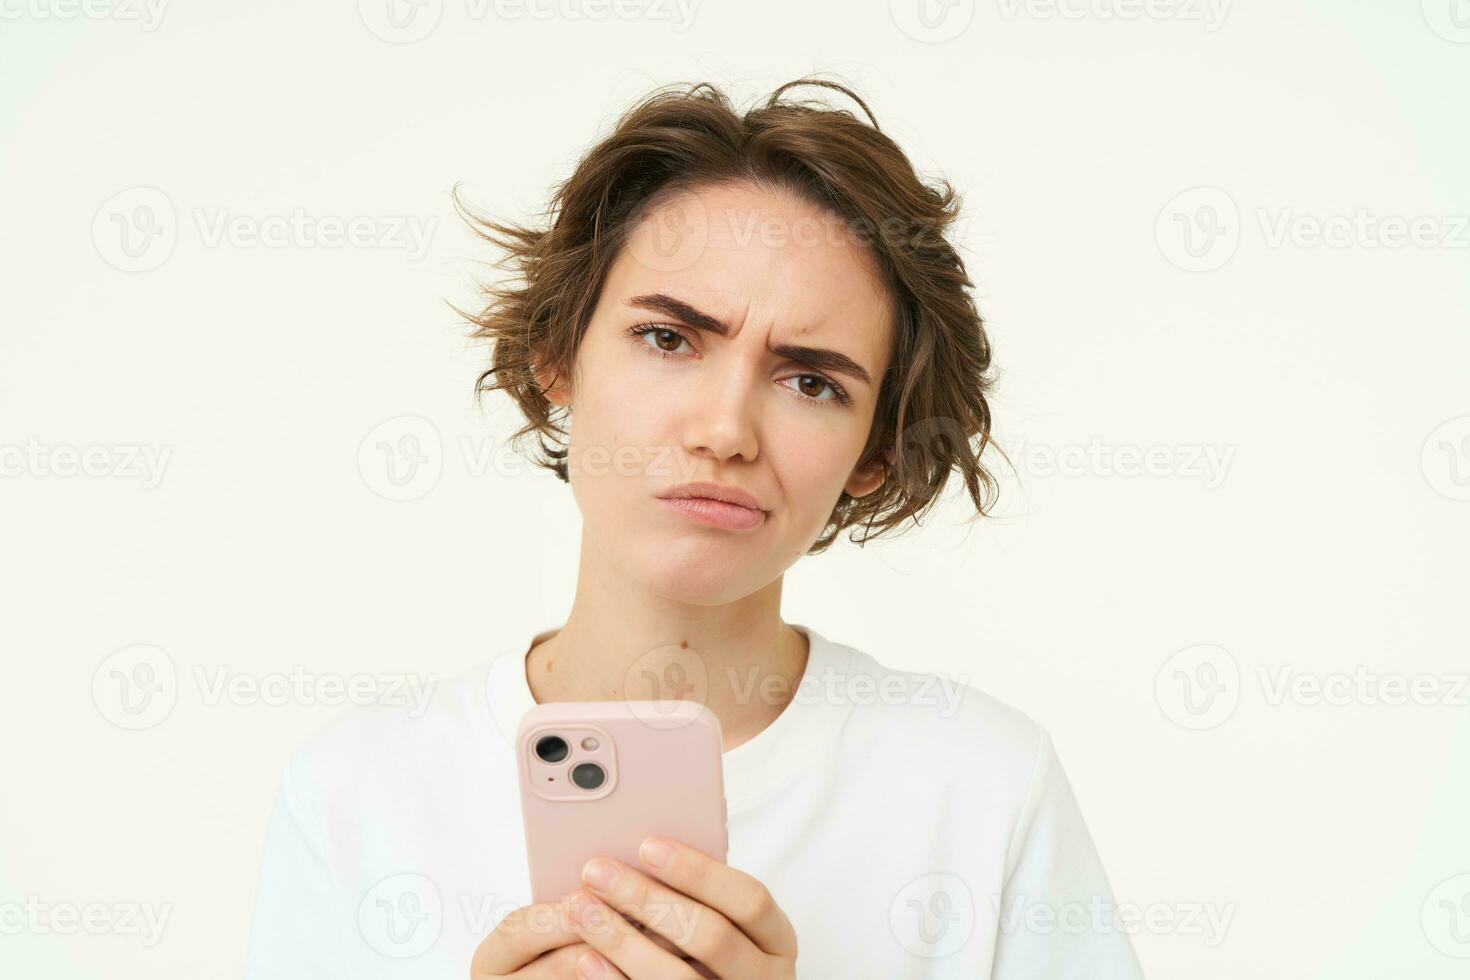 Image of complicated, confused young woman, frowning, holding smartphone, looking puzzled and doubtful, standing over white background photo